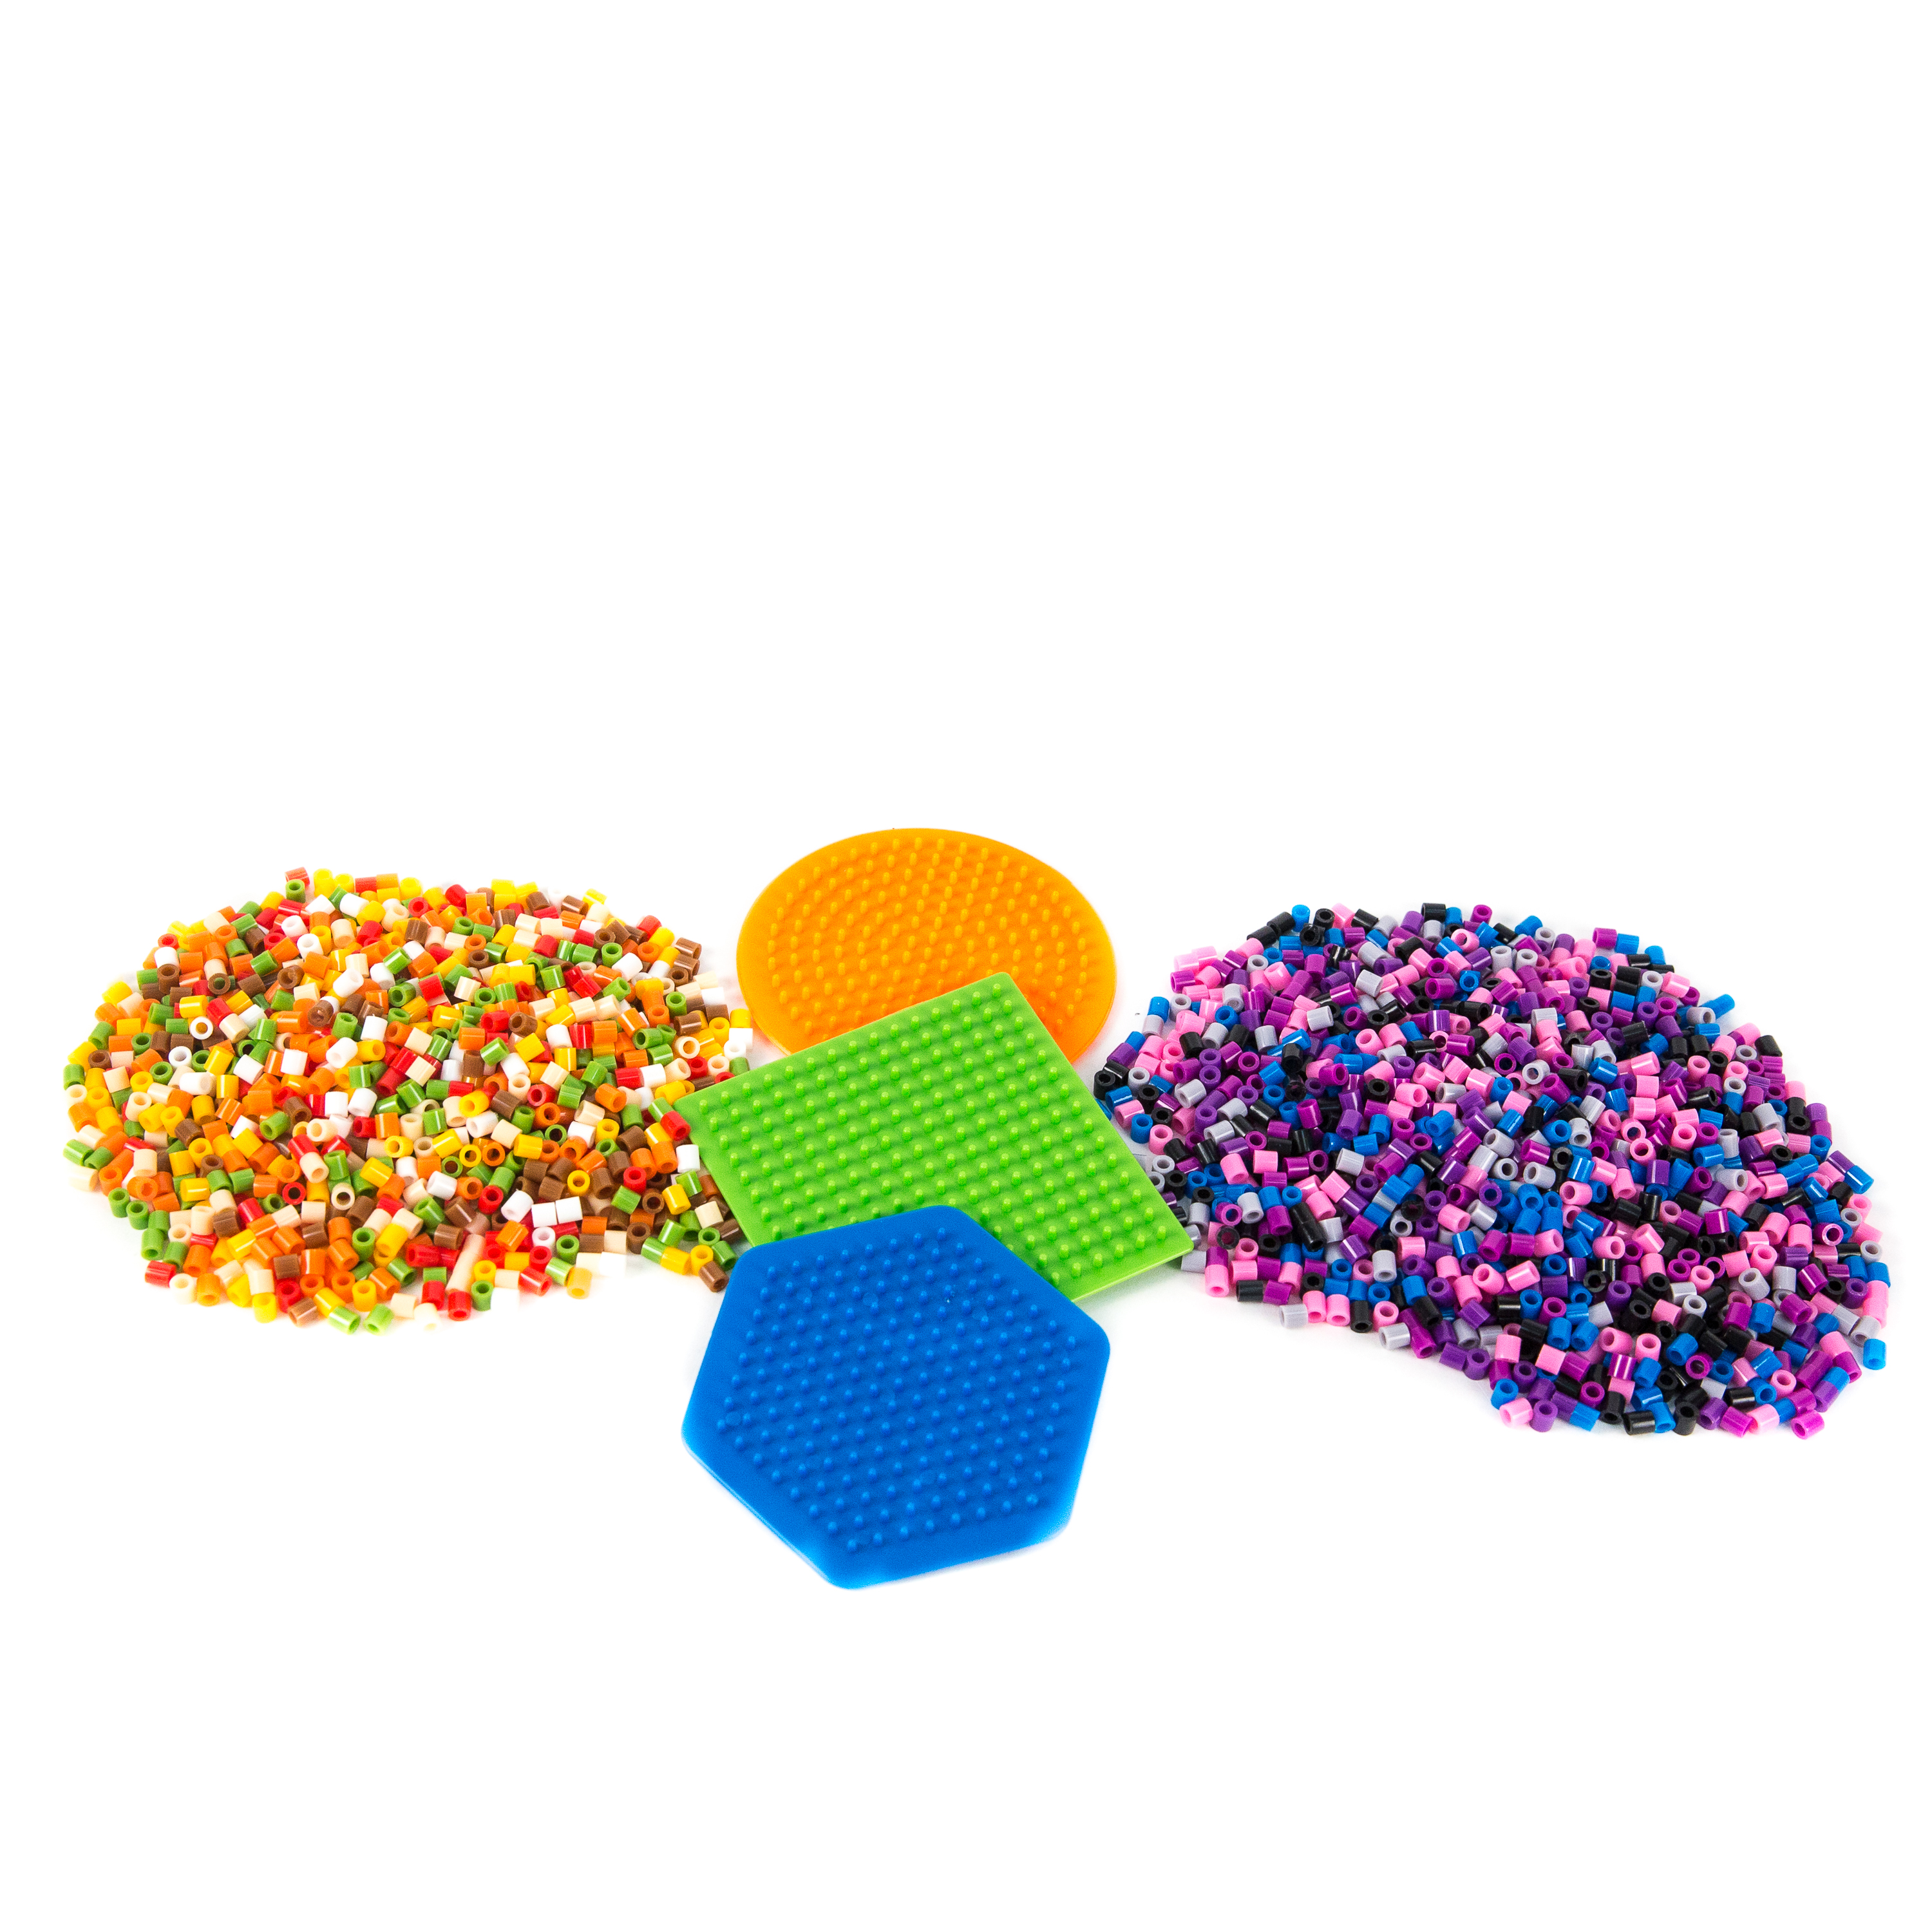 Go Create Melty Beads Variety Pack, Colorful Bead Art, Arts & Crafts - image 2 of 4